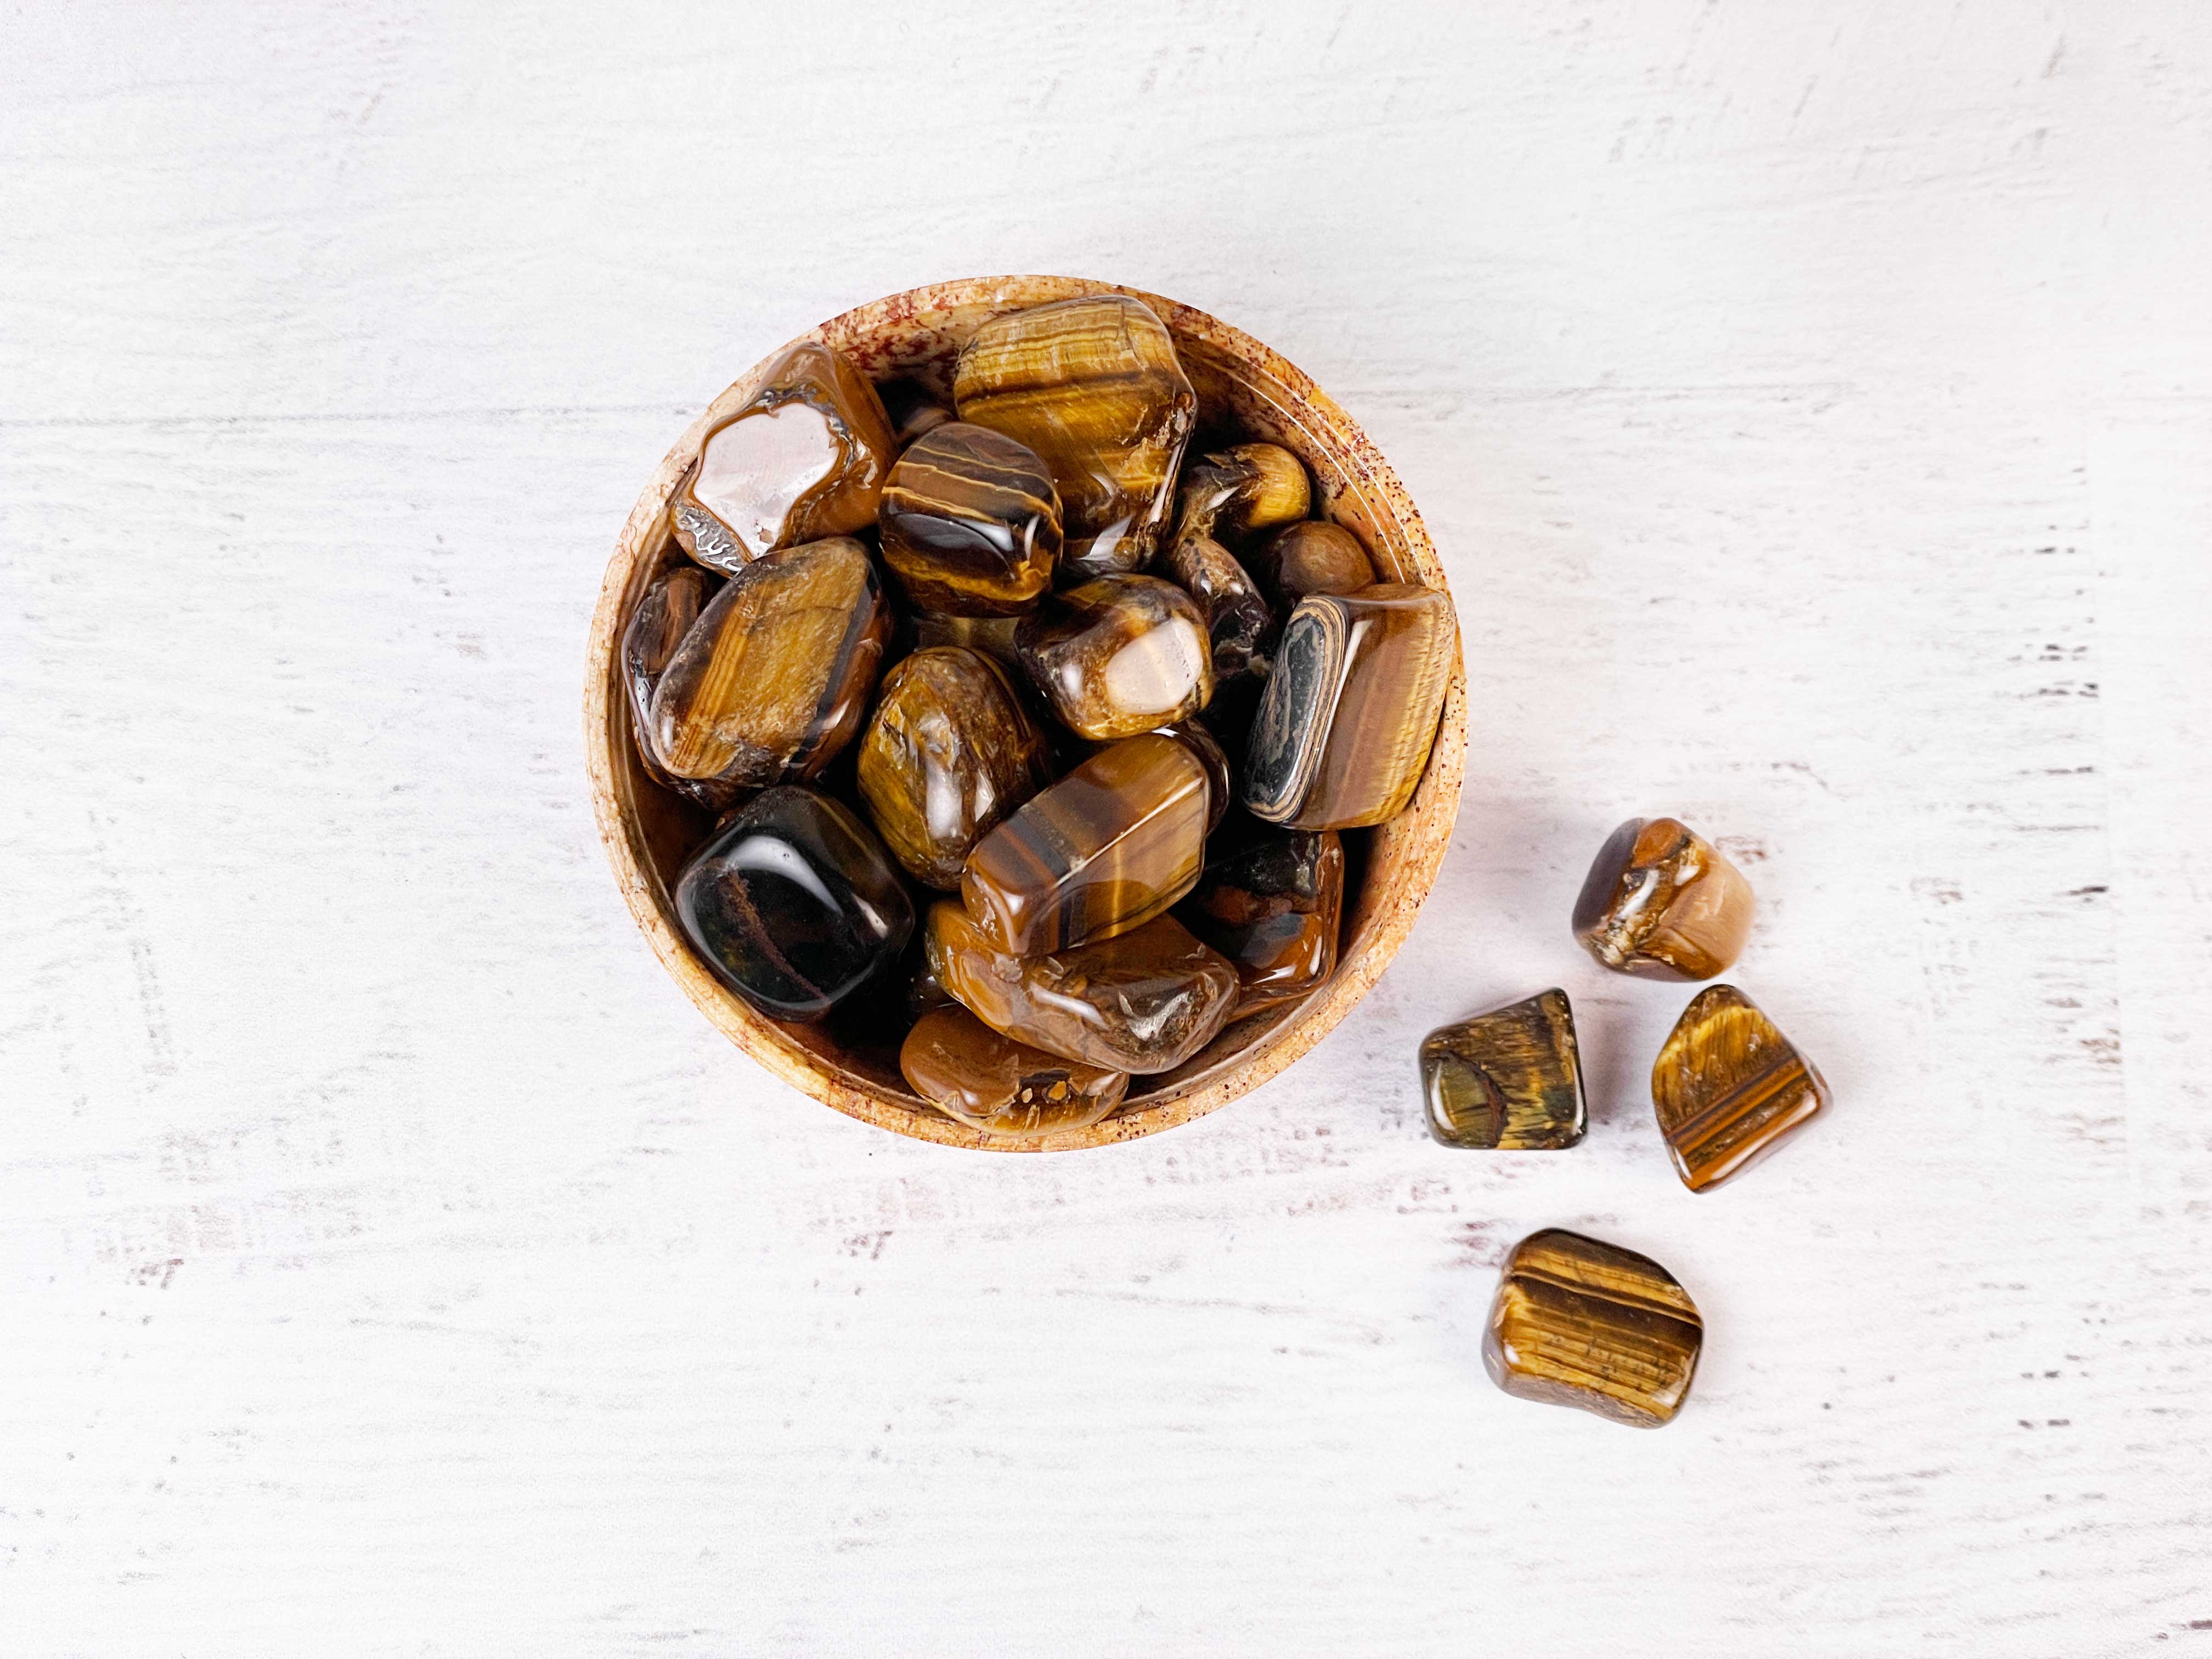 Buy Online Latest and Unique Tumbled Tiger Eye - Protection, Sobriety, Balance, Vitality, Strength, Practicality, Warrior, Christ Consciousness | Shop Best Spiritual Items - The Mystical Ritu